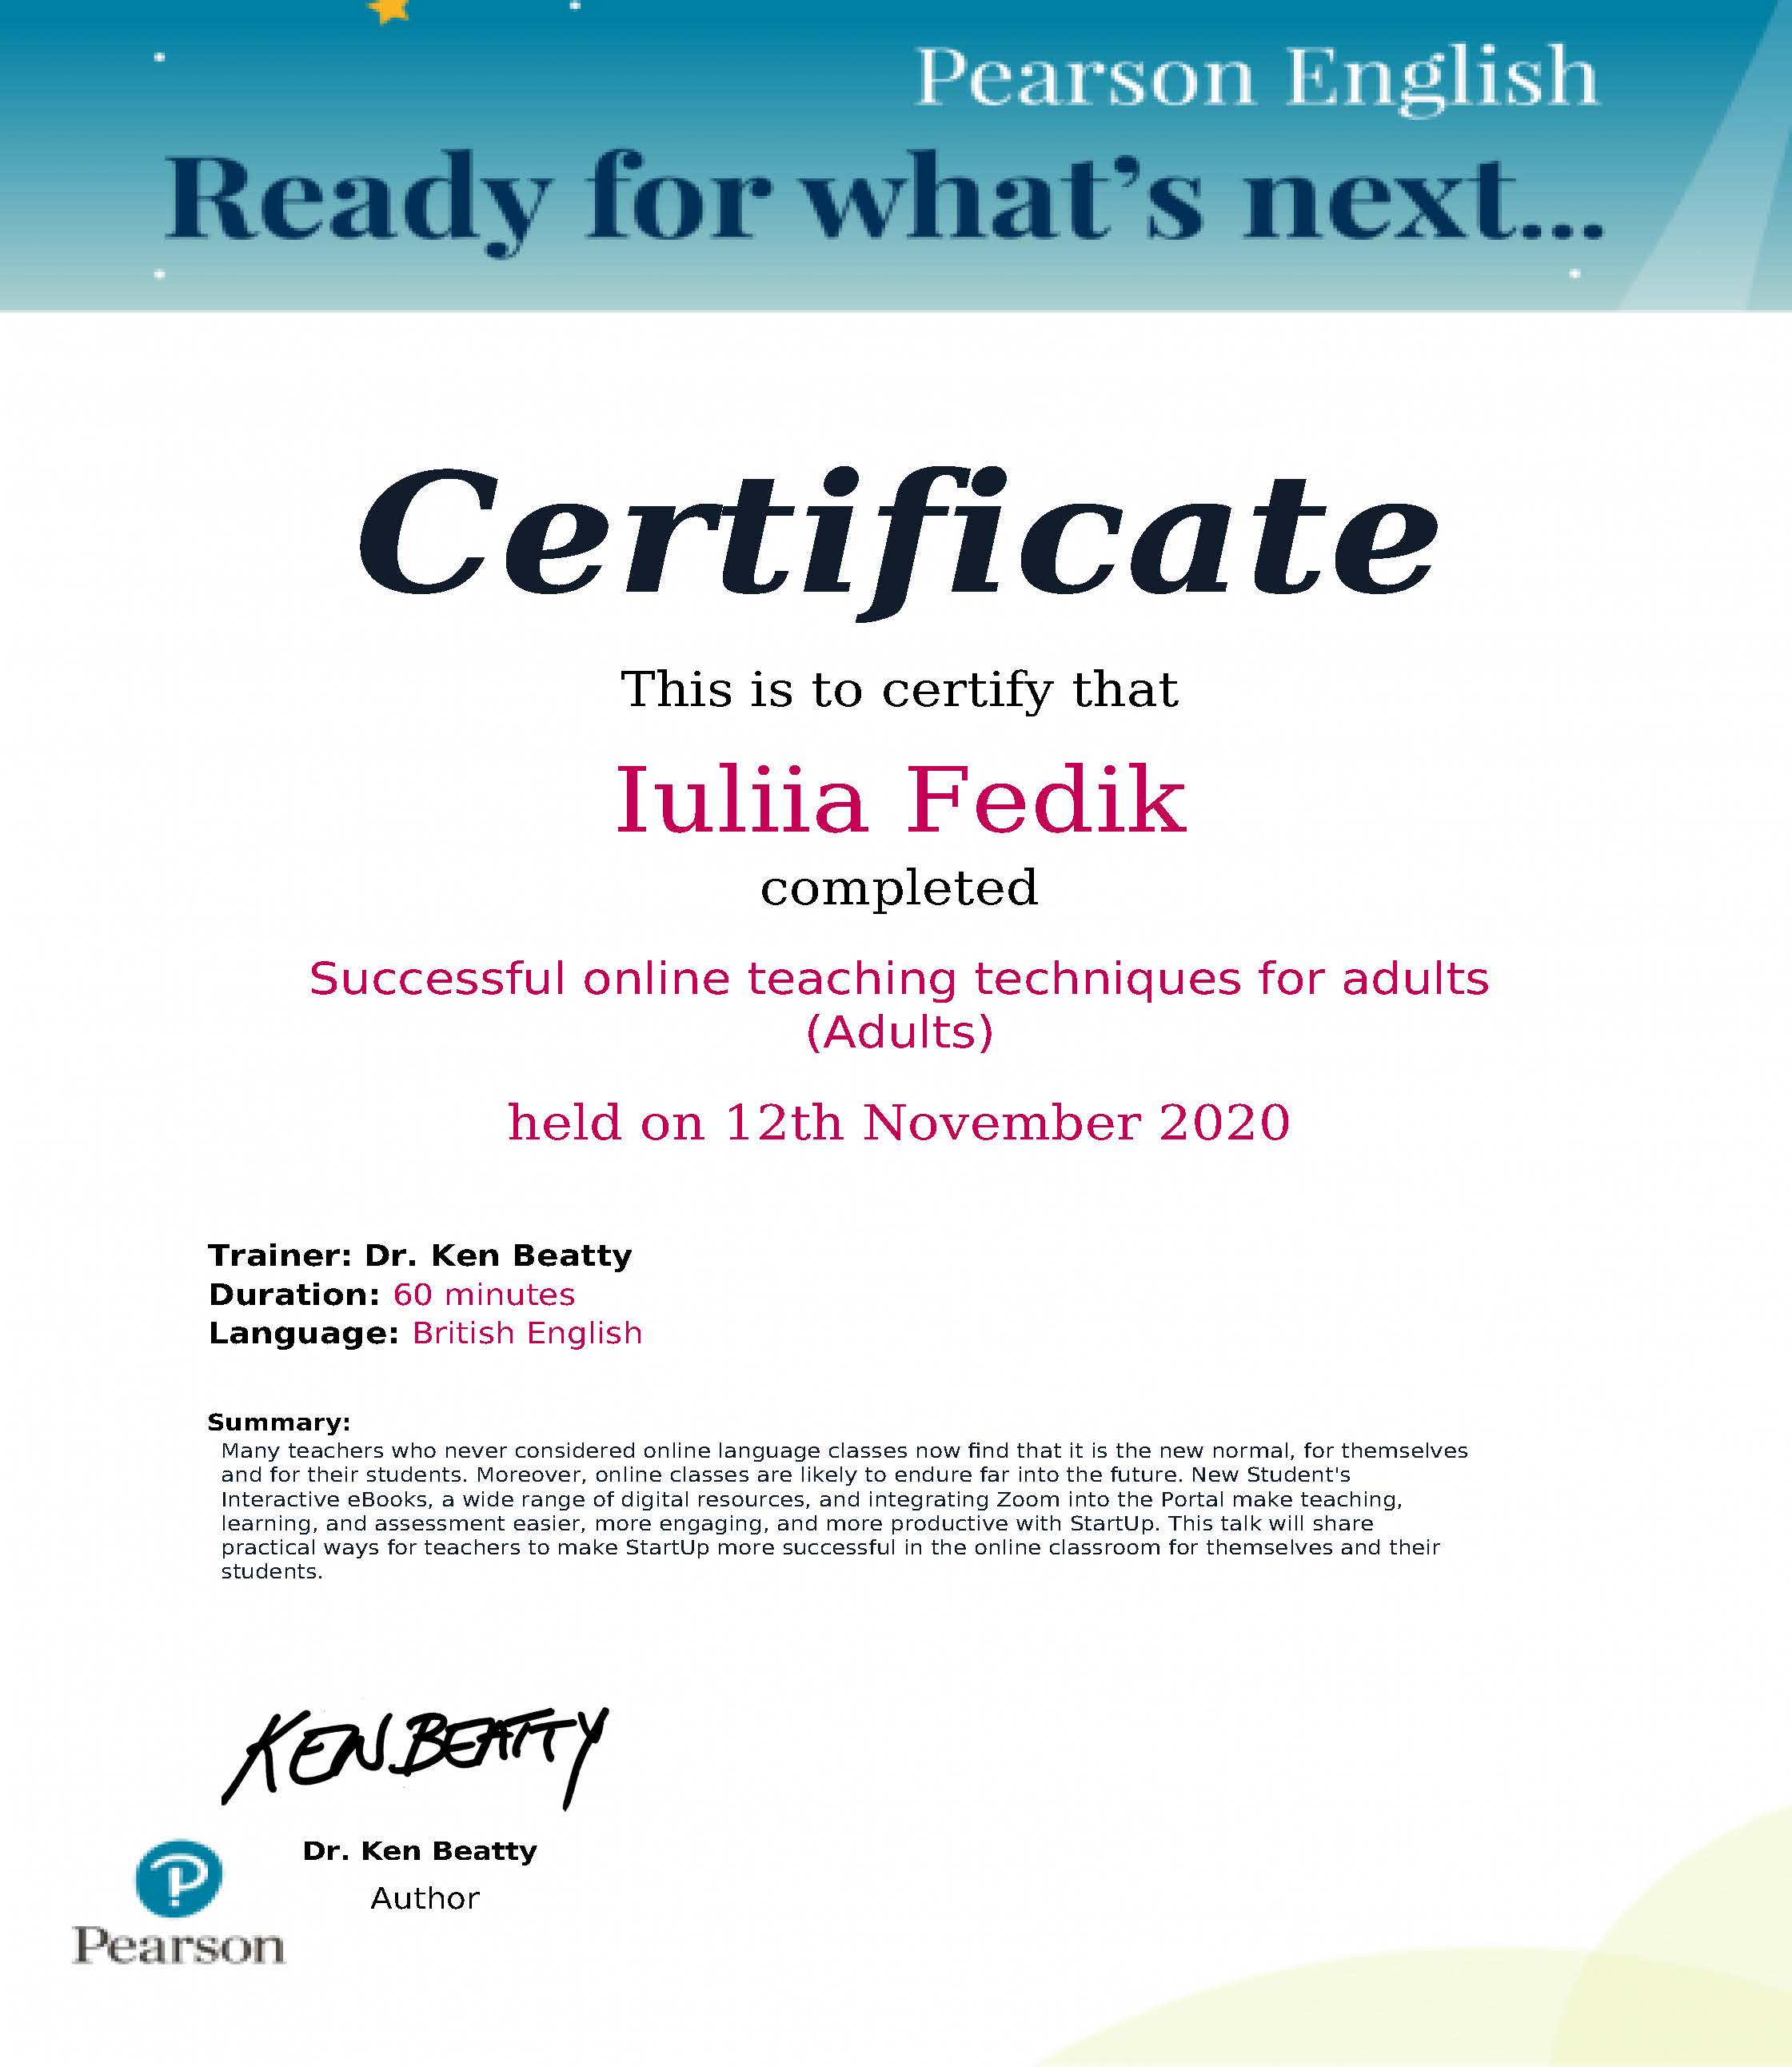 Successful online teaching techniques for adults